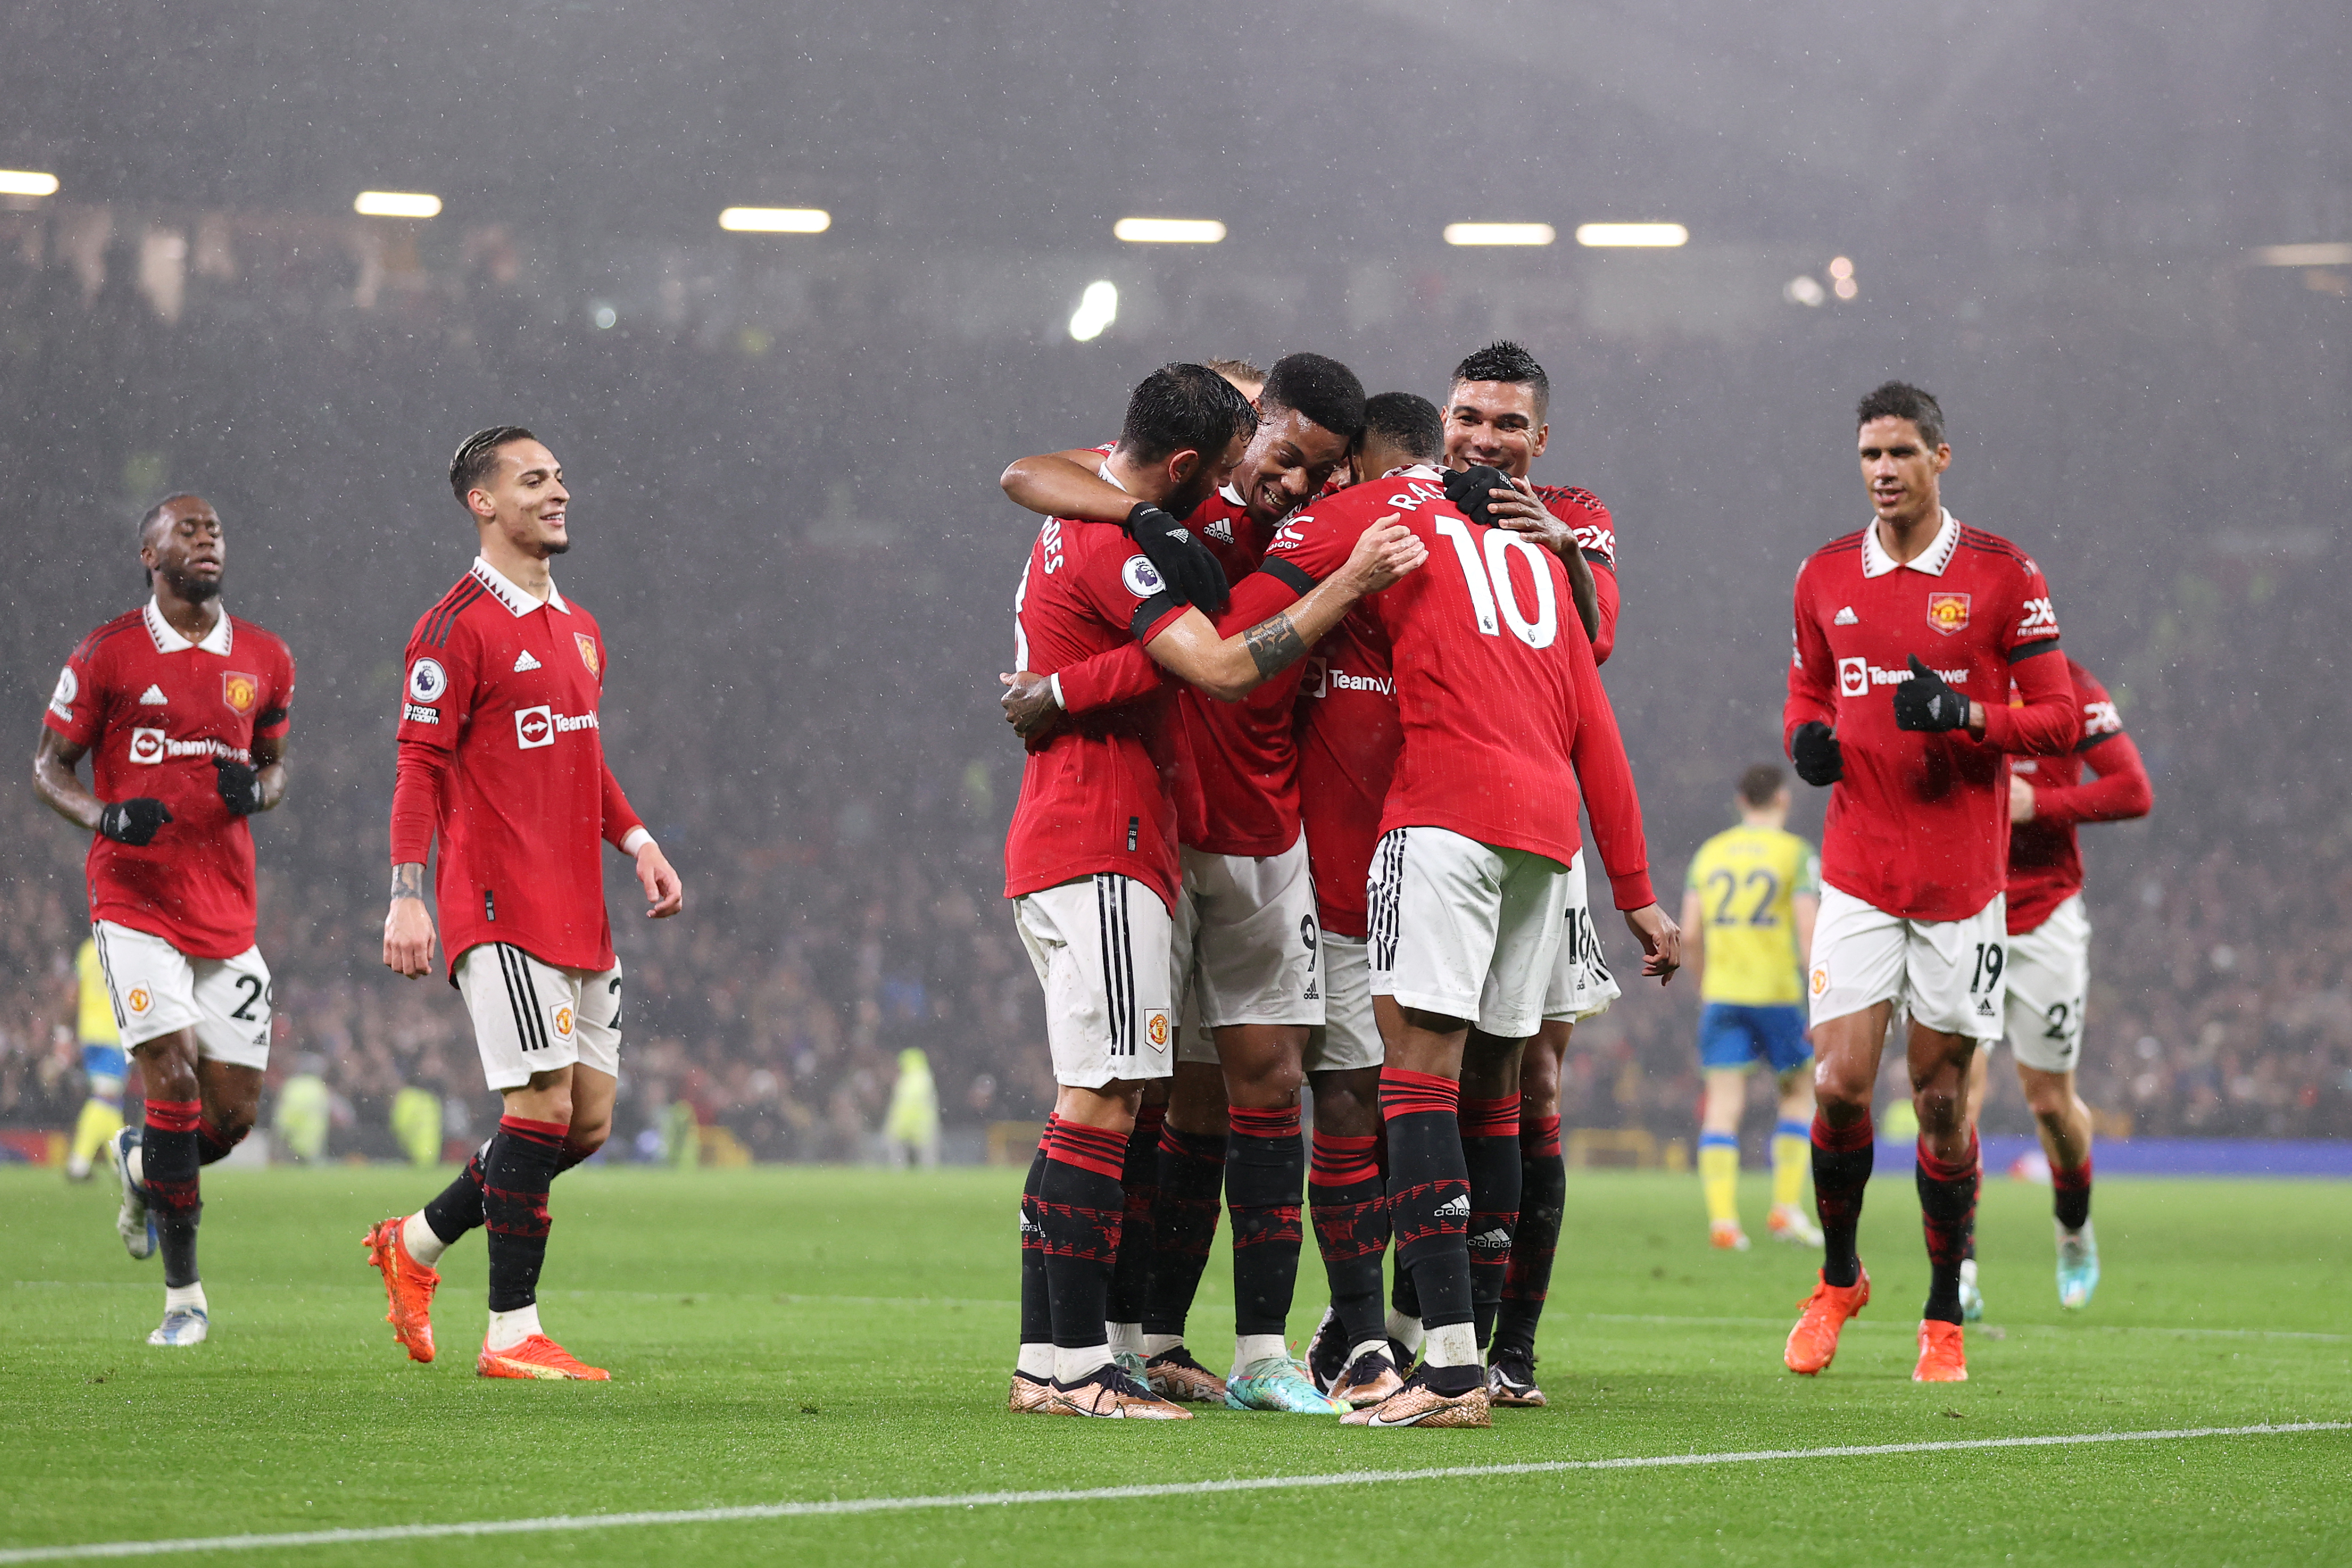 , Man Utd 3 Nott Forest 0: Erik ten Hag’s rampant Reds straight back into Premier League groove as top four charge resumes